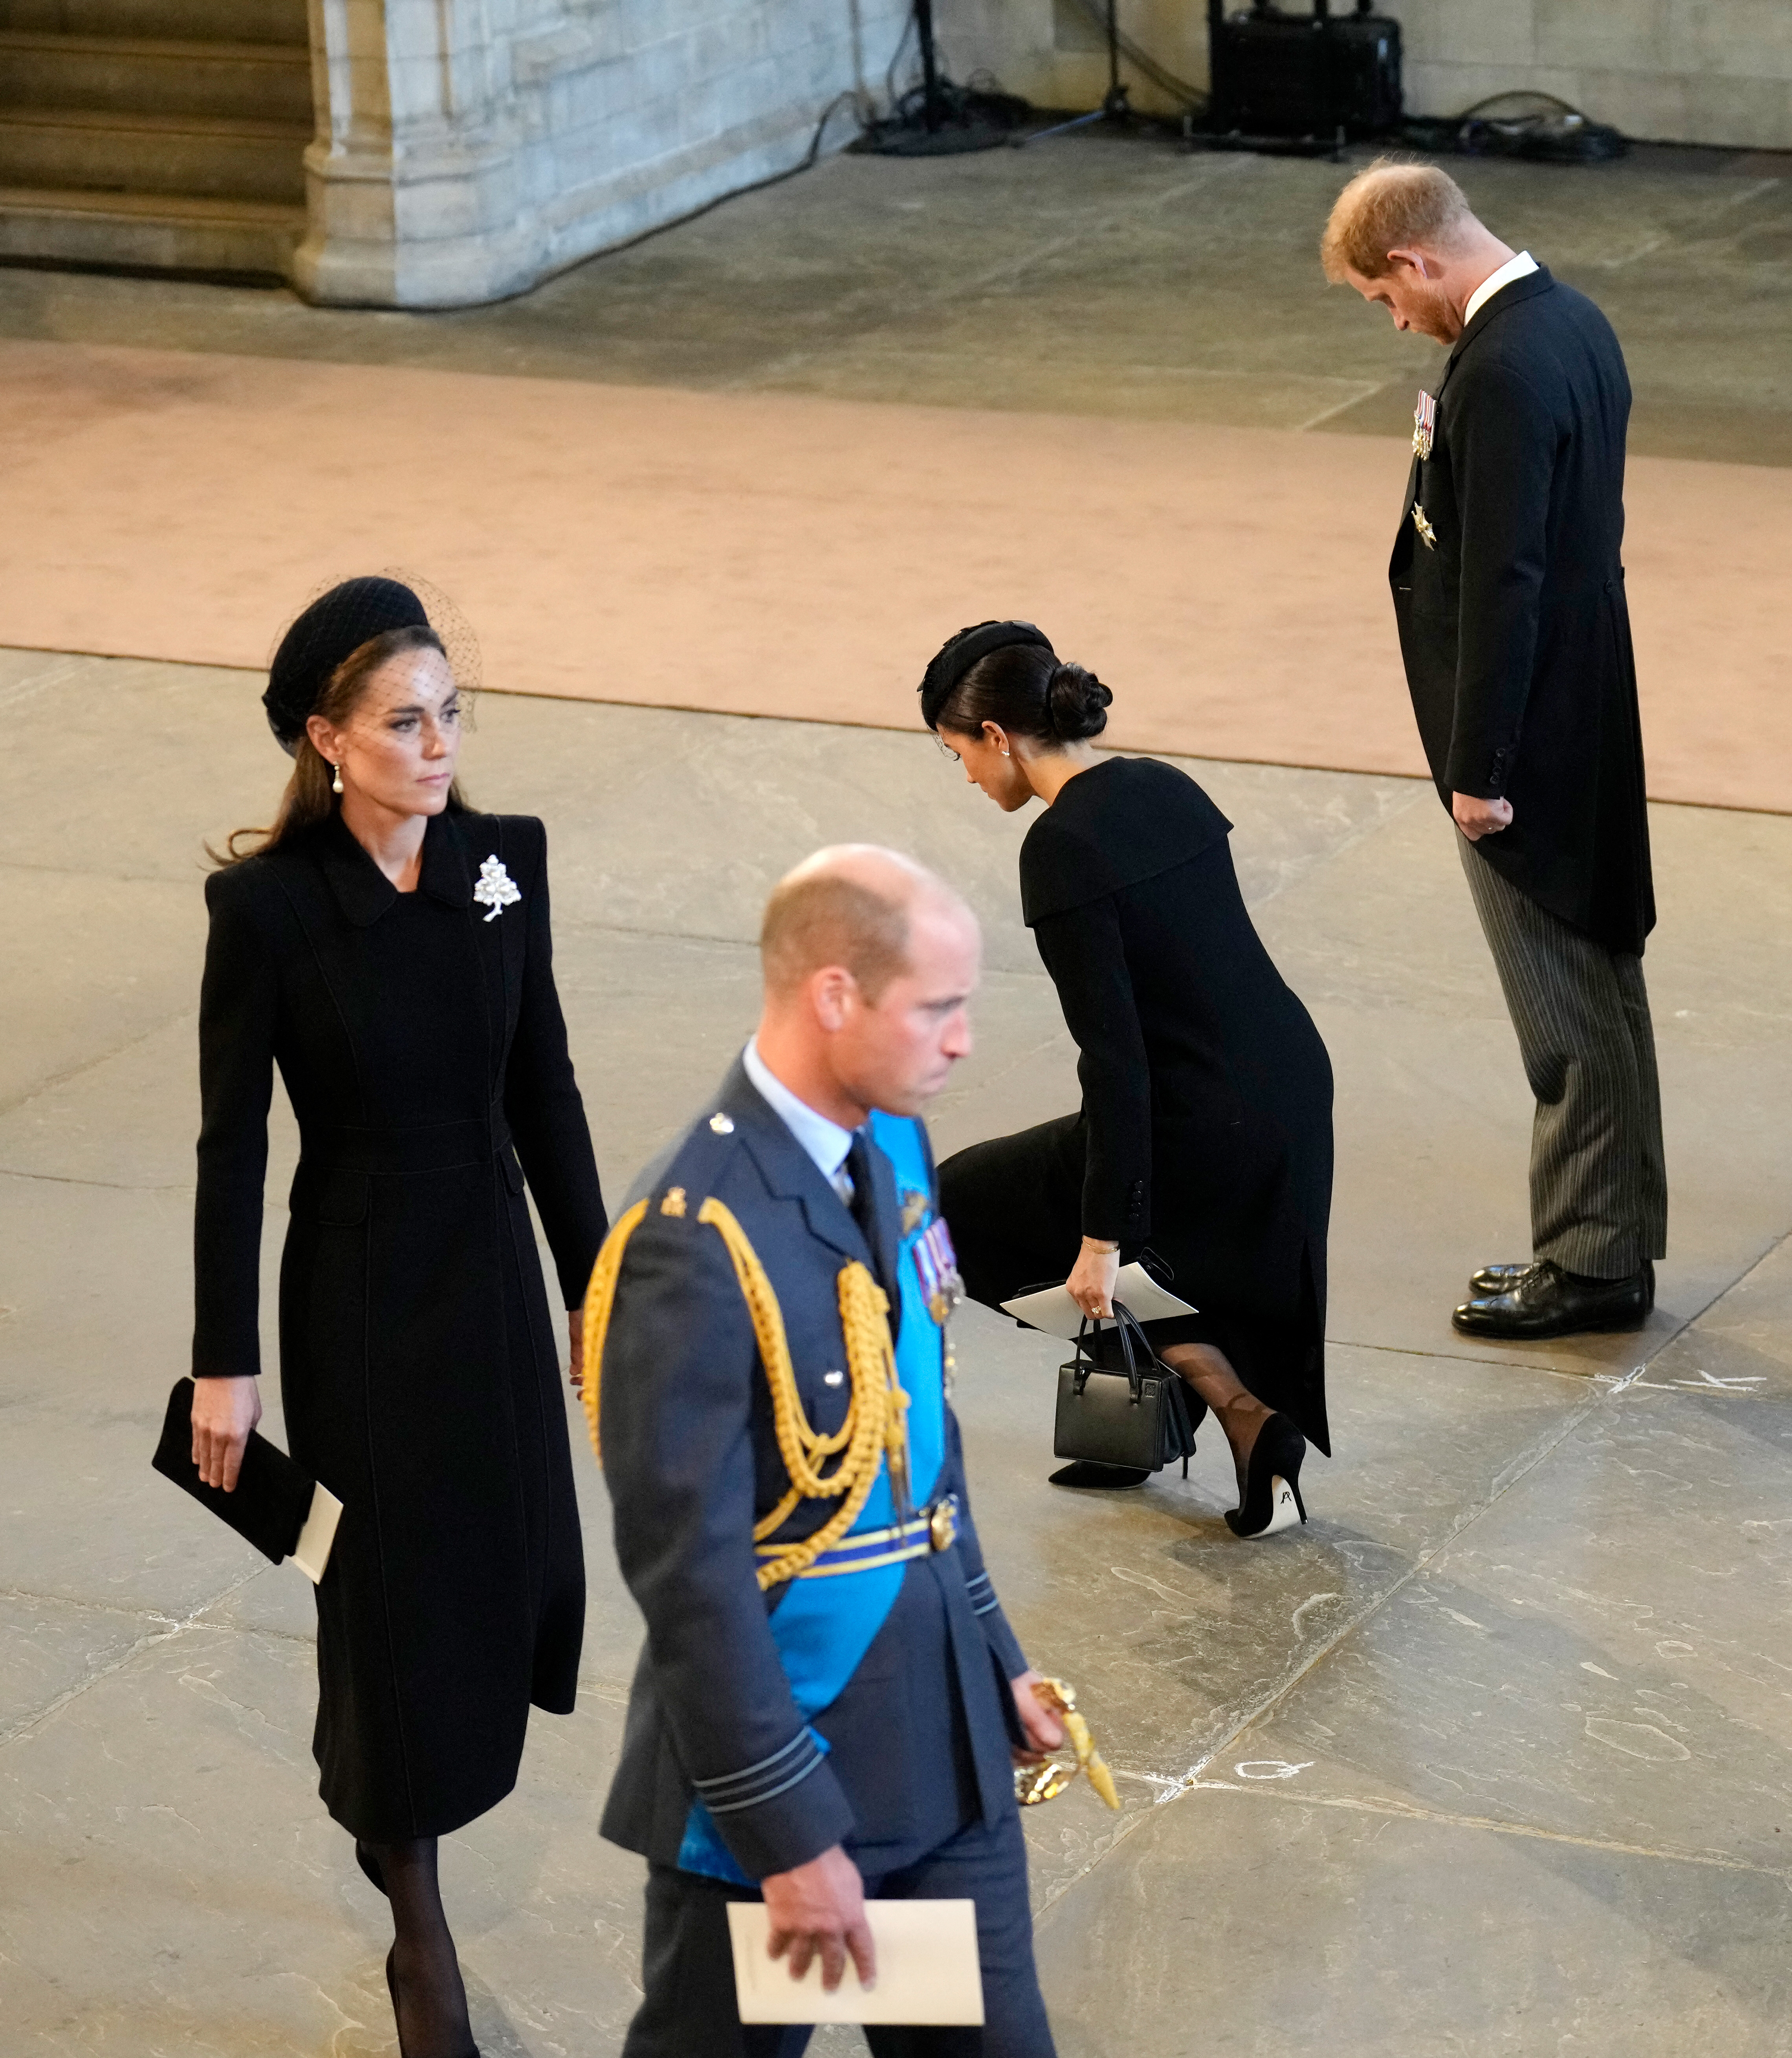 Curtsying rules explained: Only one woman is exempt from curtsying in the  Royal Family